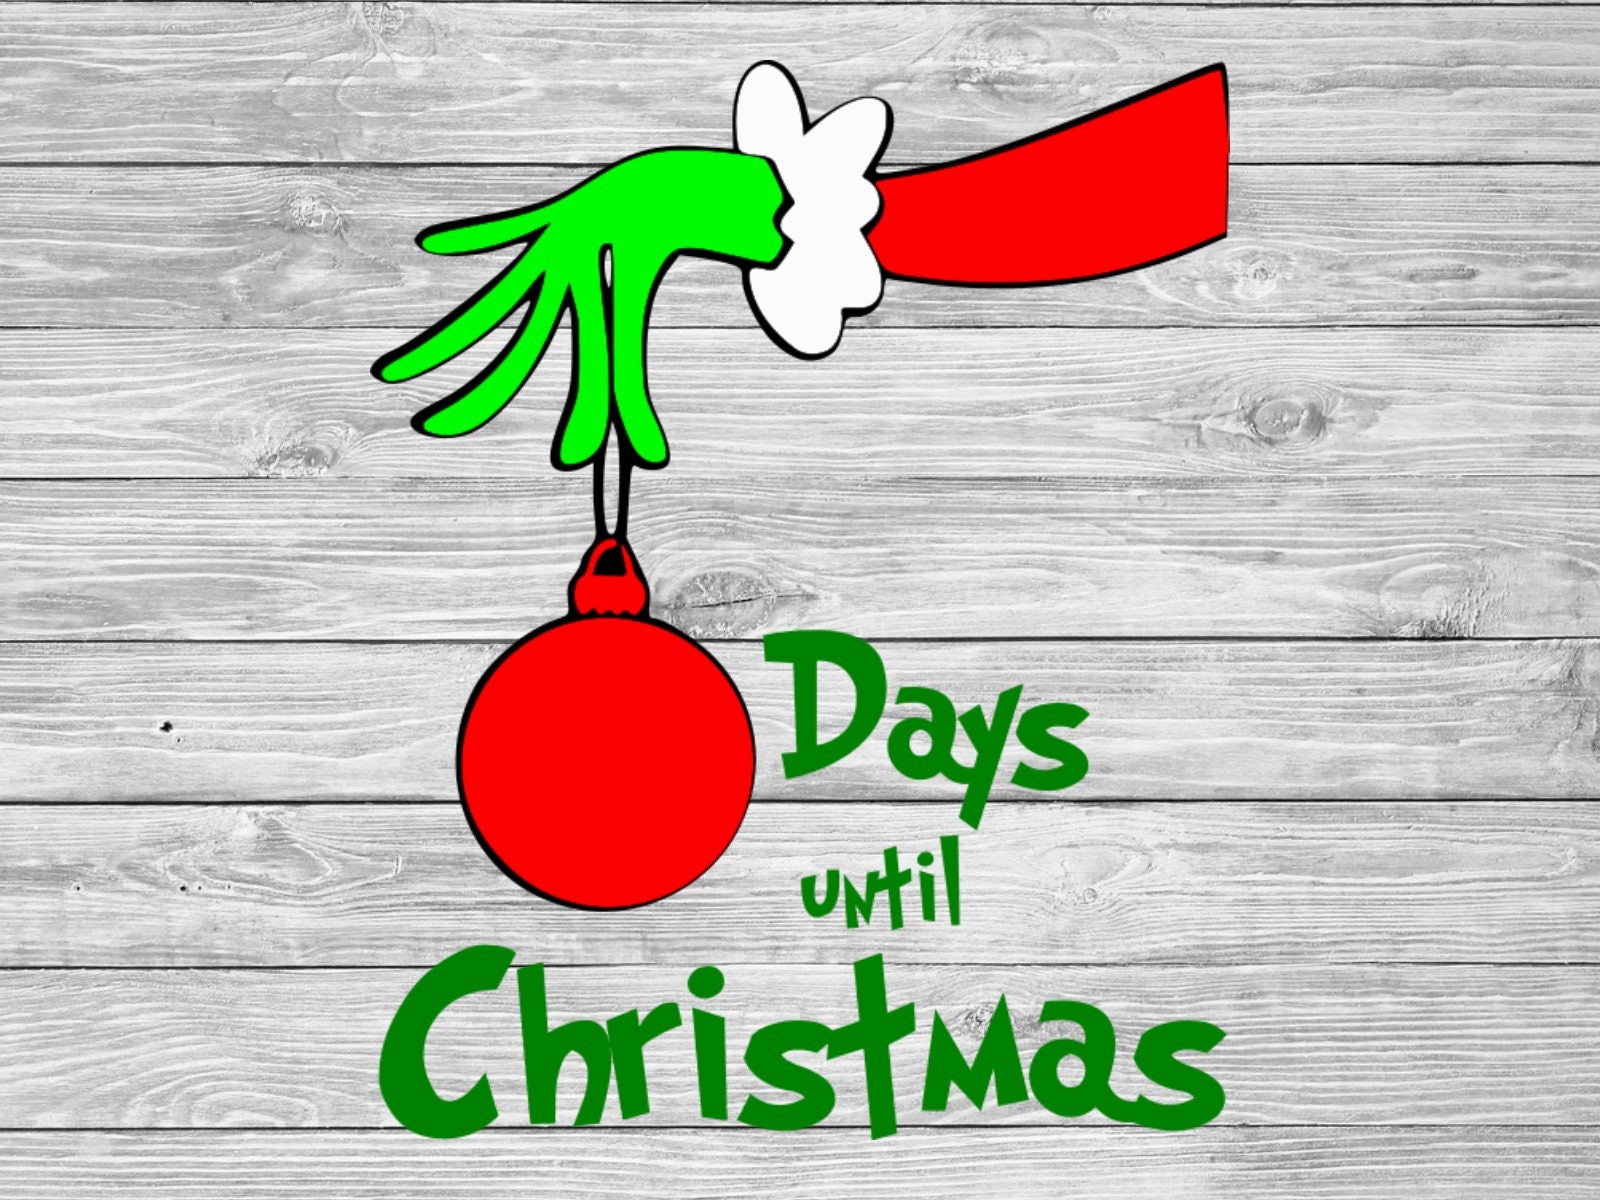 Download Grinch hand countdown to Christmas svg file Days until